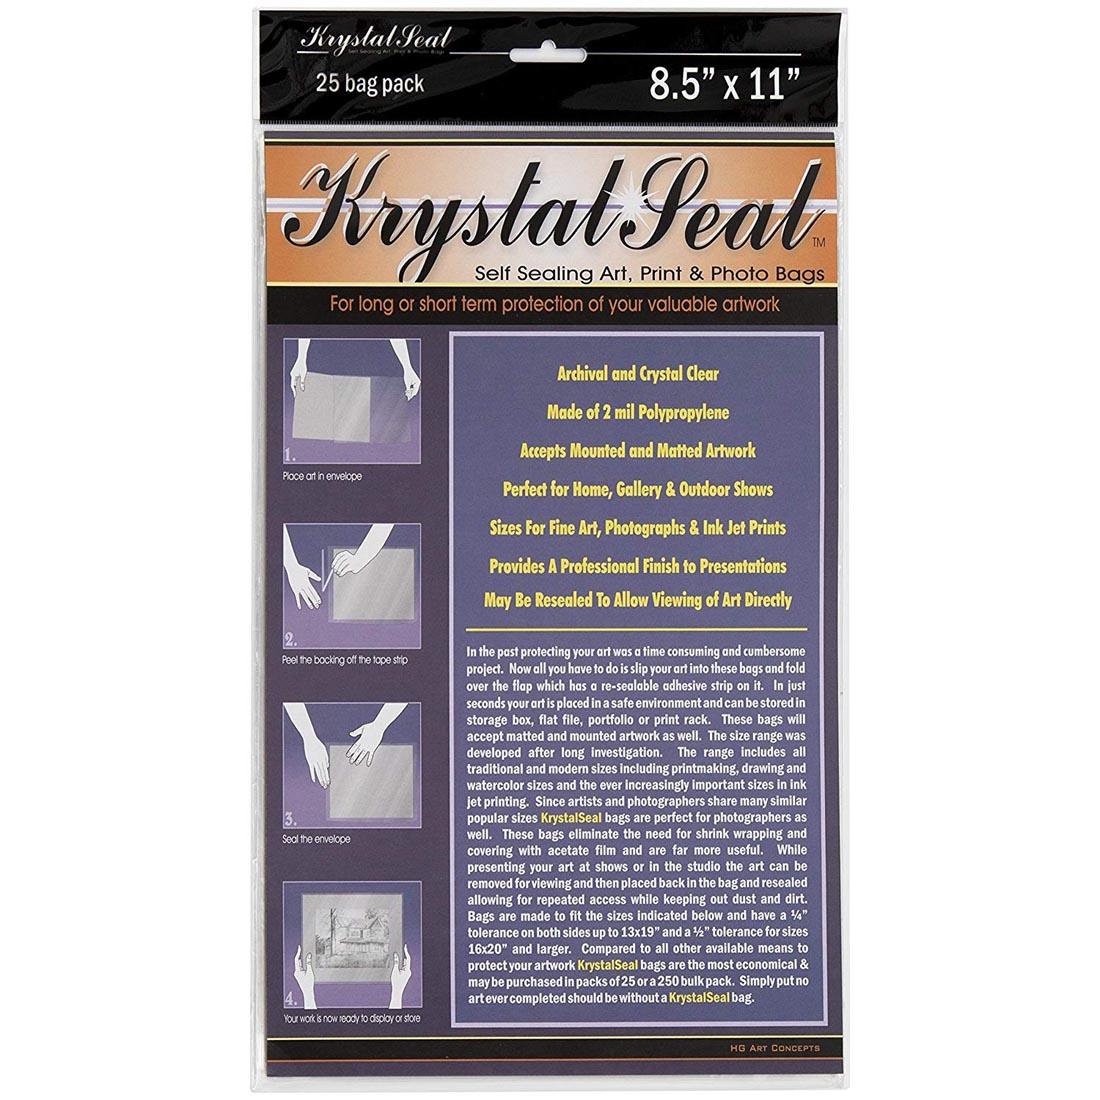 8-1/2 x 11" clear polypropylene bags for sealing documents